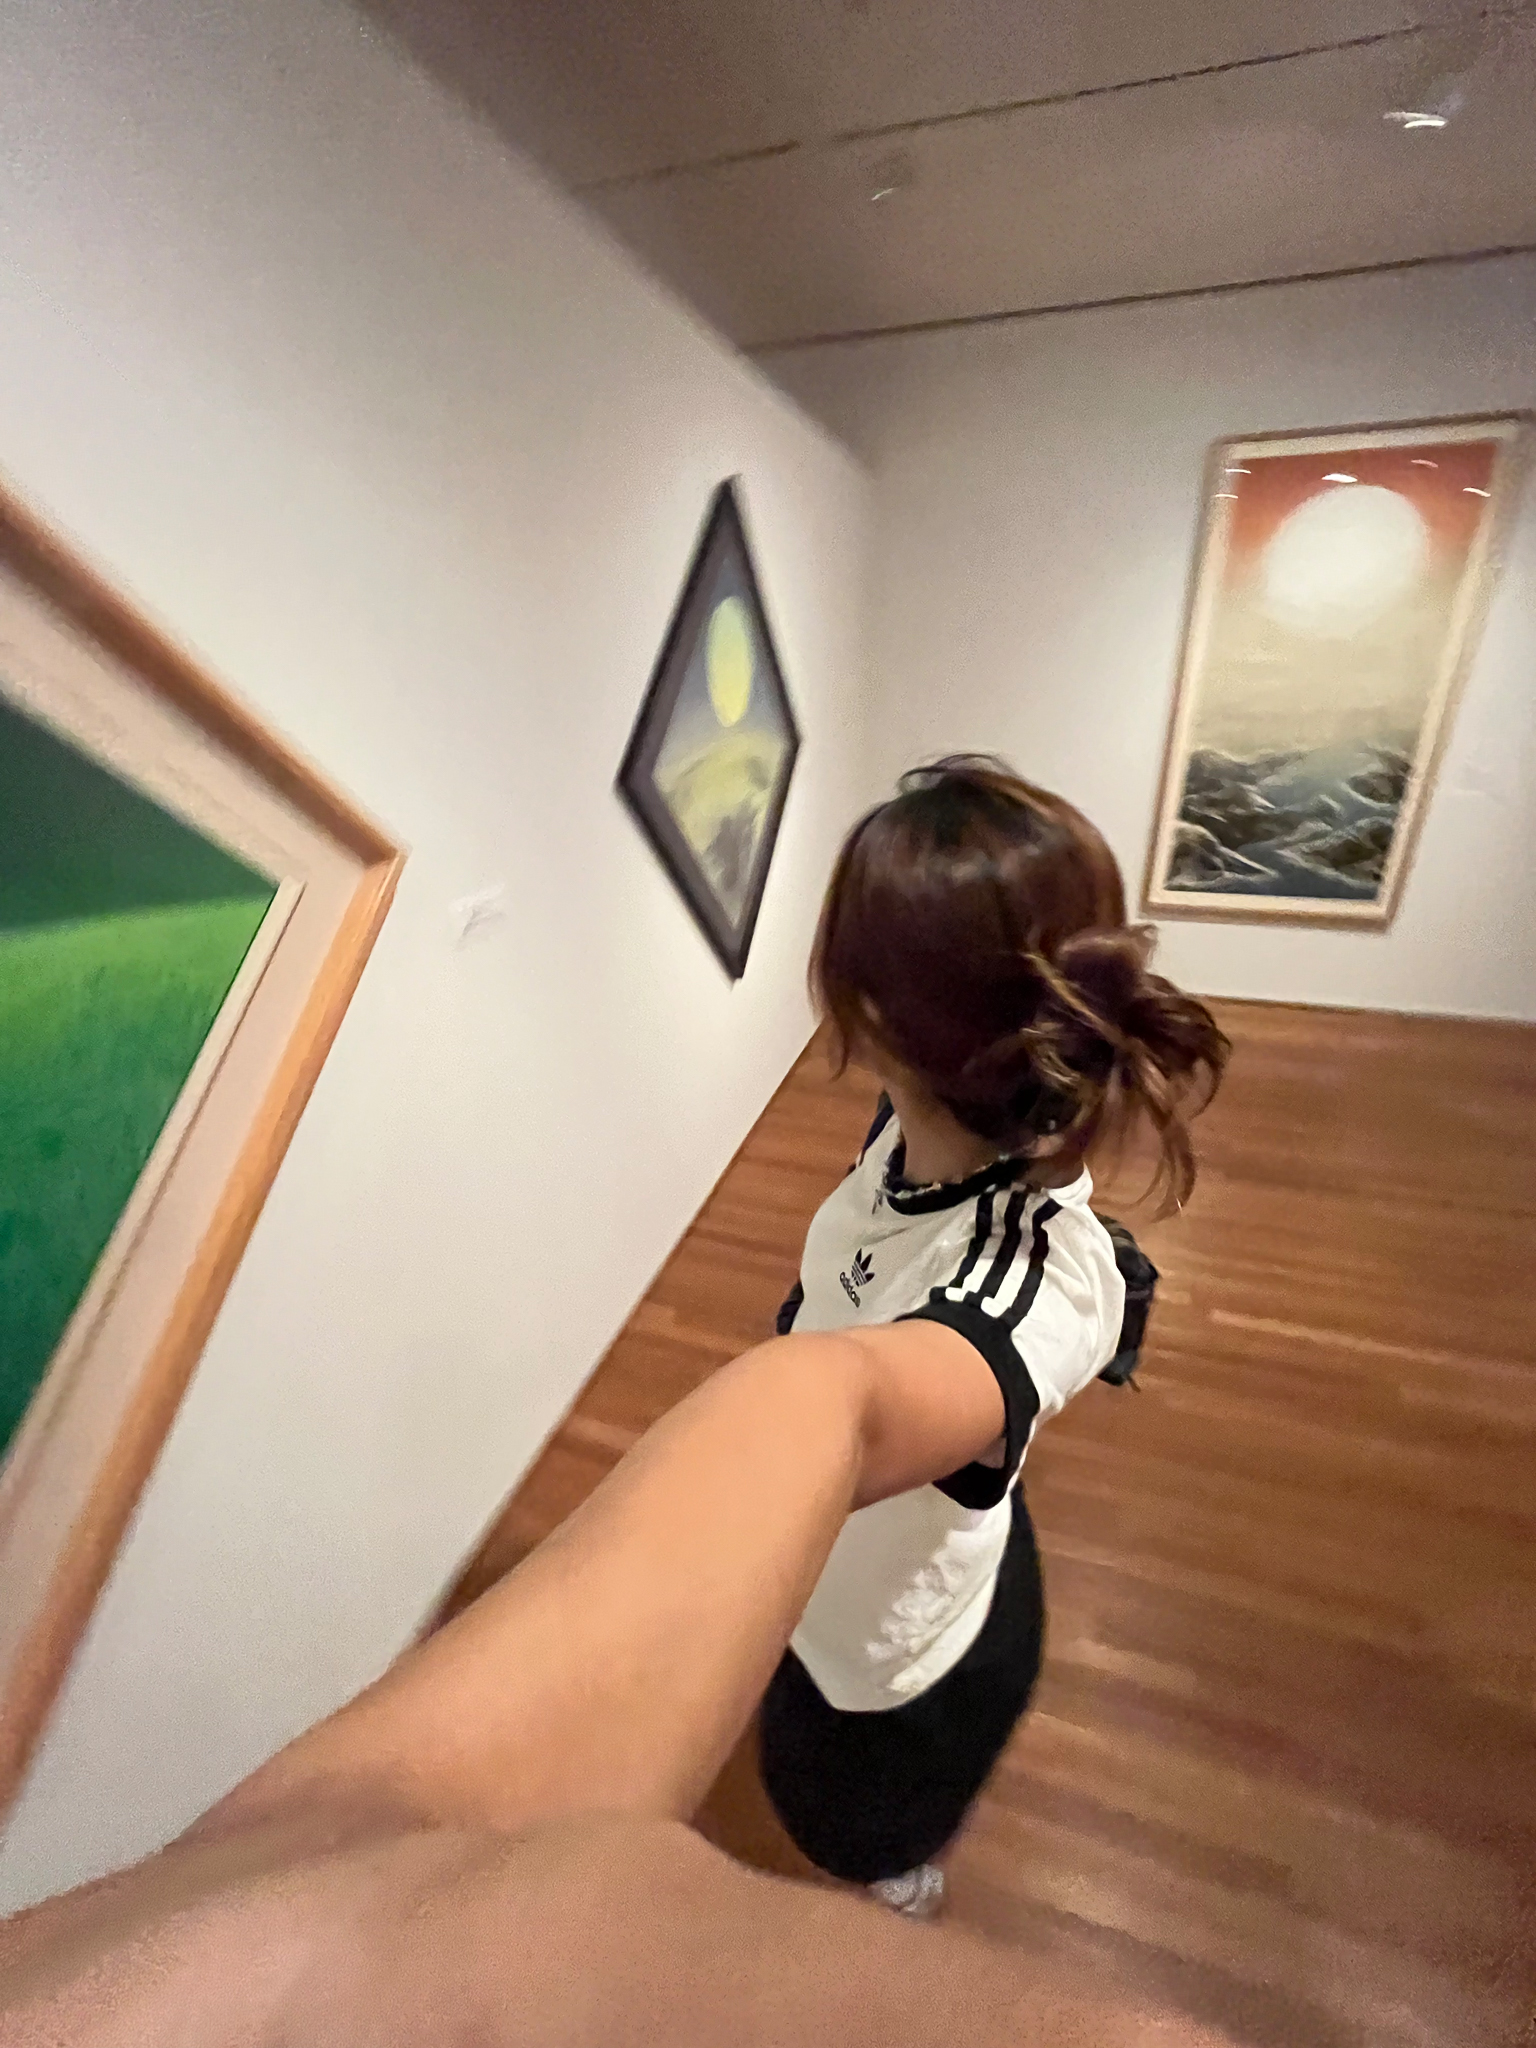 A selfie of a woman looking at an artwork in an exhibition